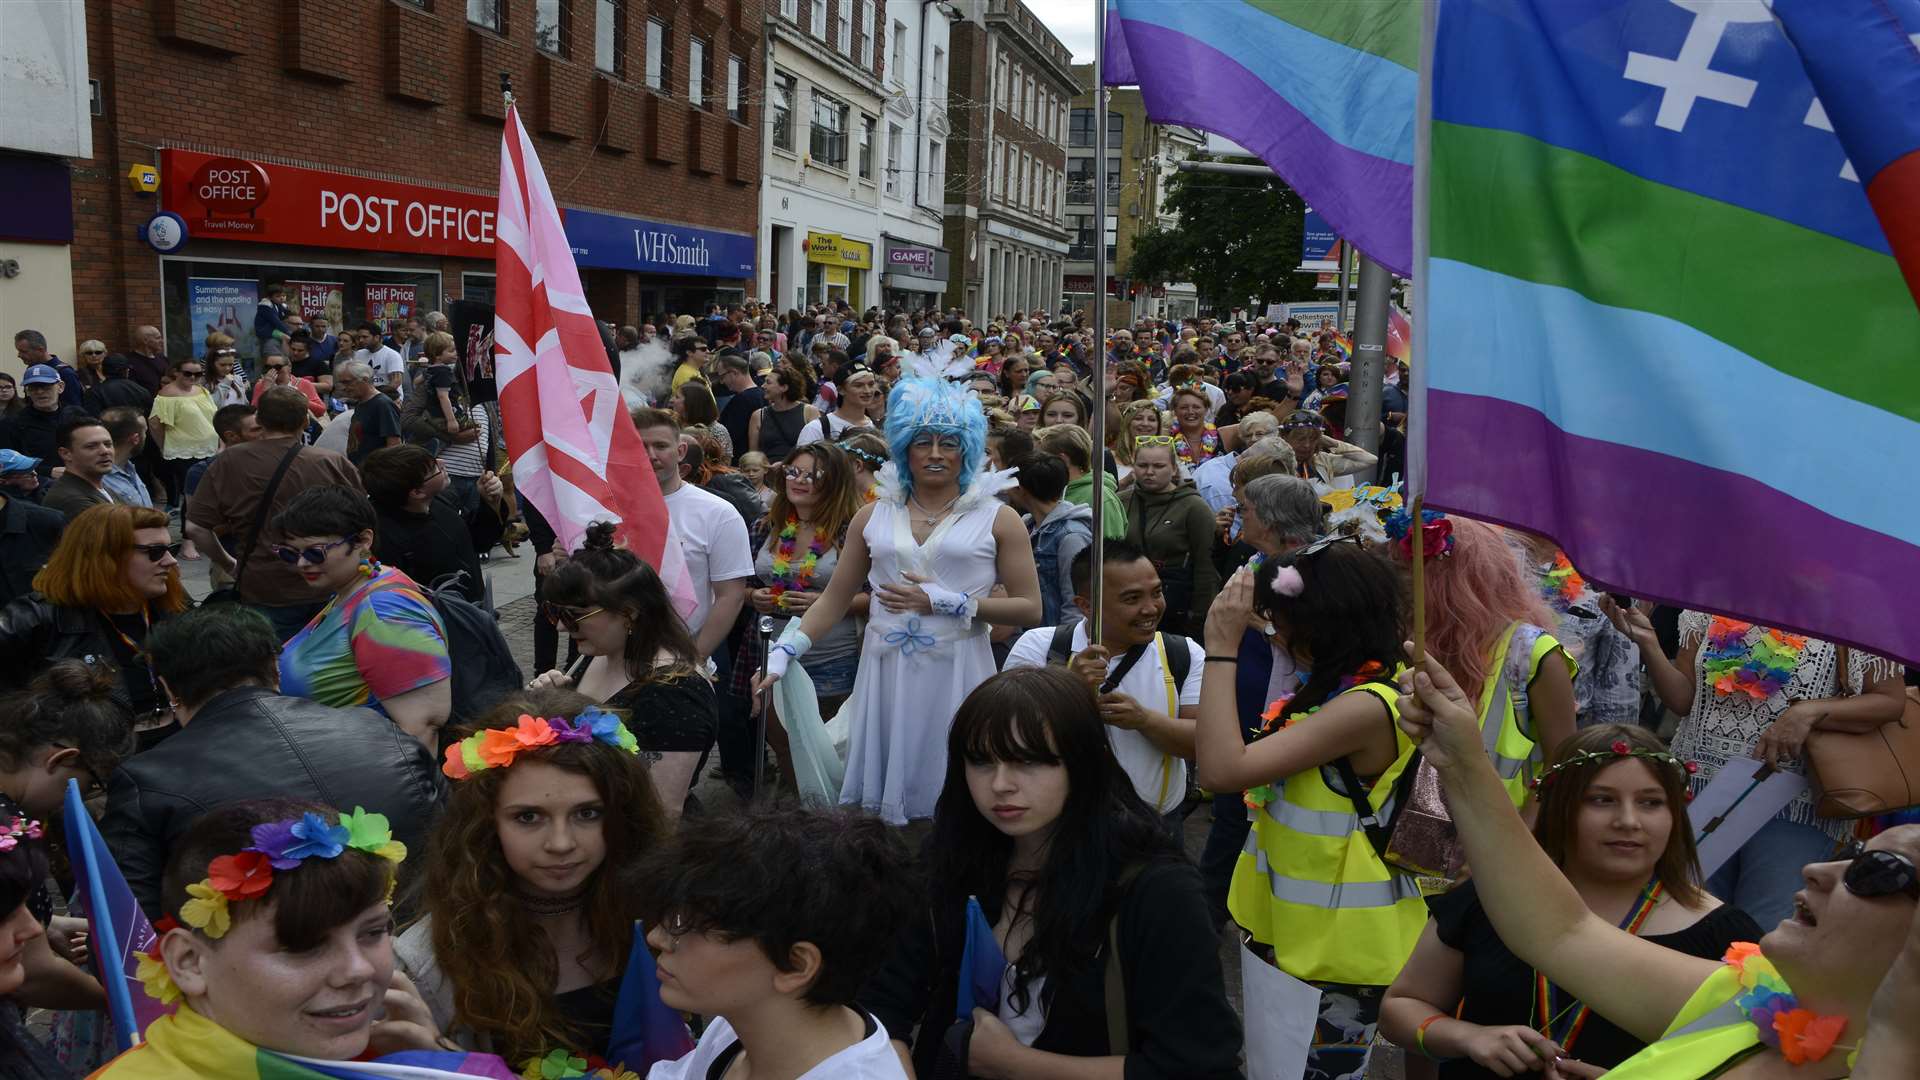 Hundreds of people packed Folkestone town centre for the Pride parade earlier this month